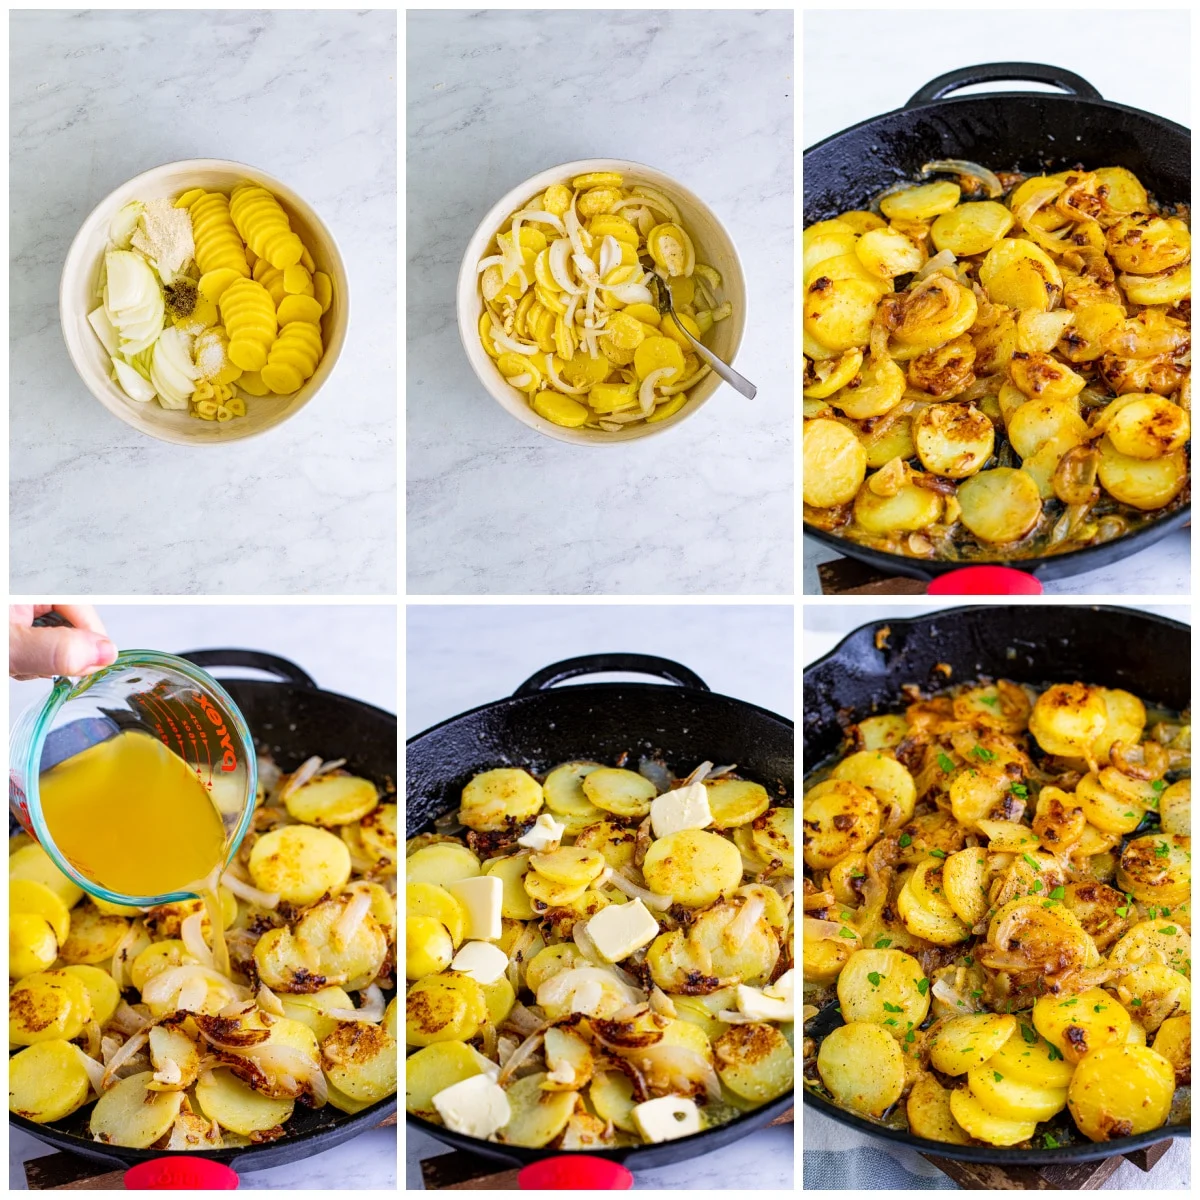 Step by step photos on how to make Smothered Potatoes.